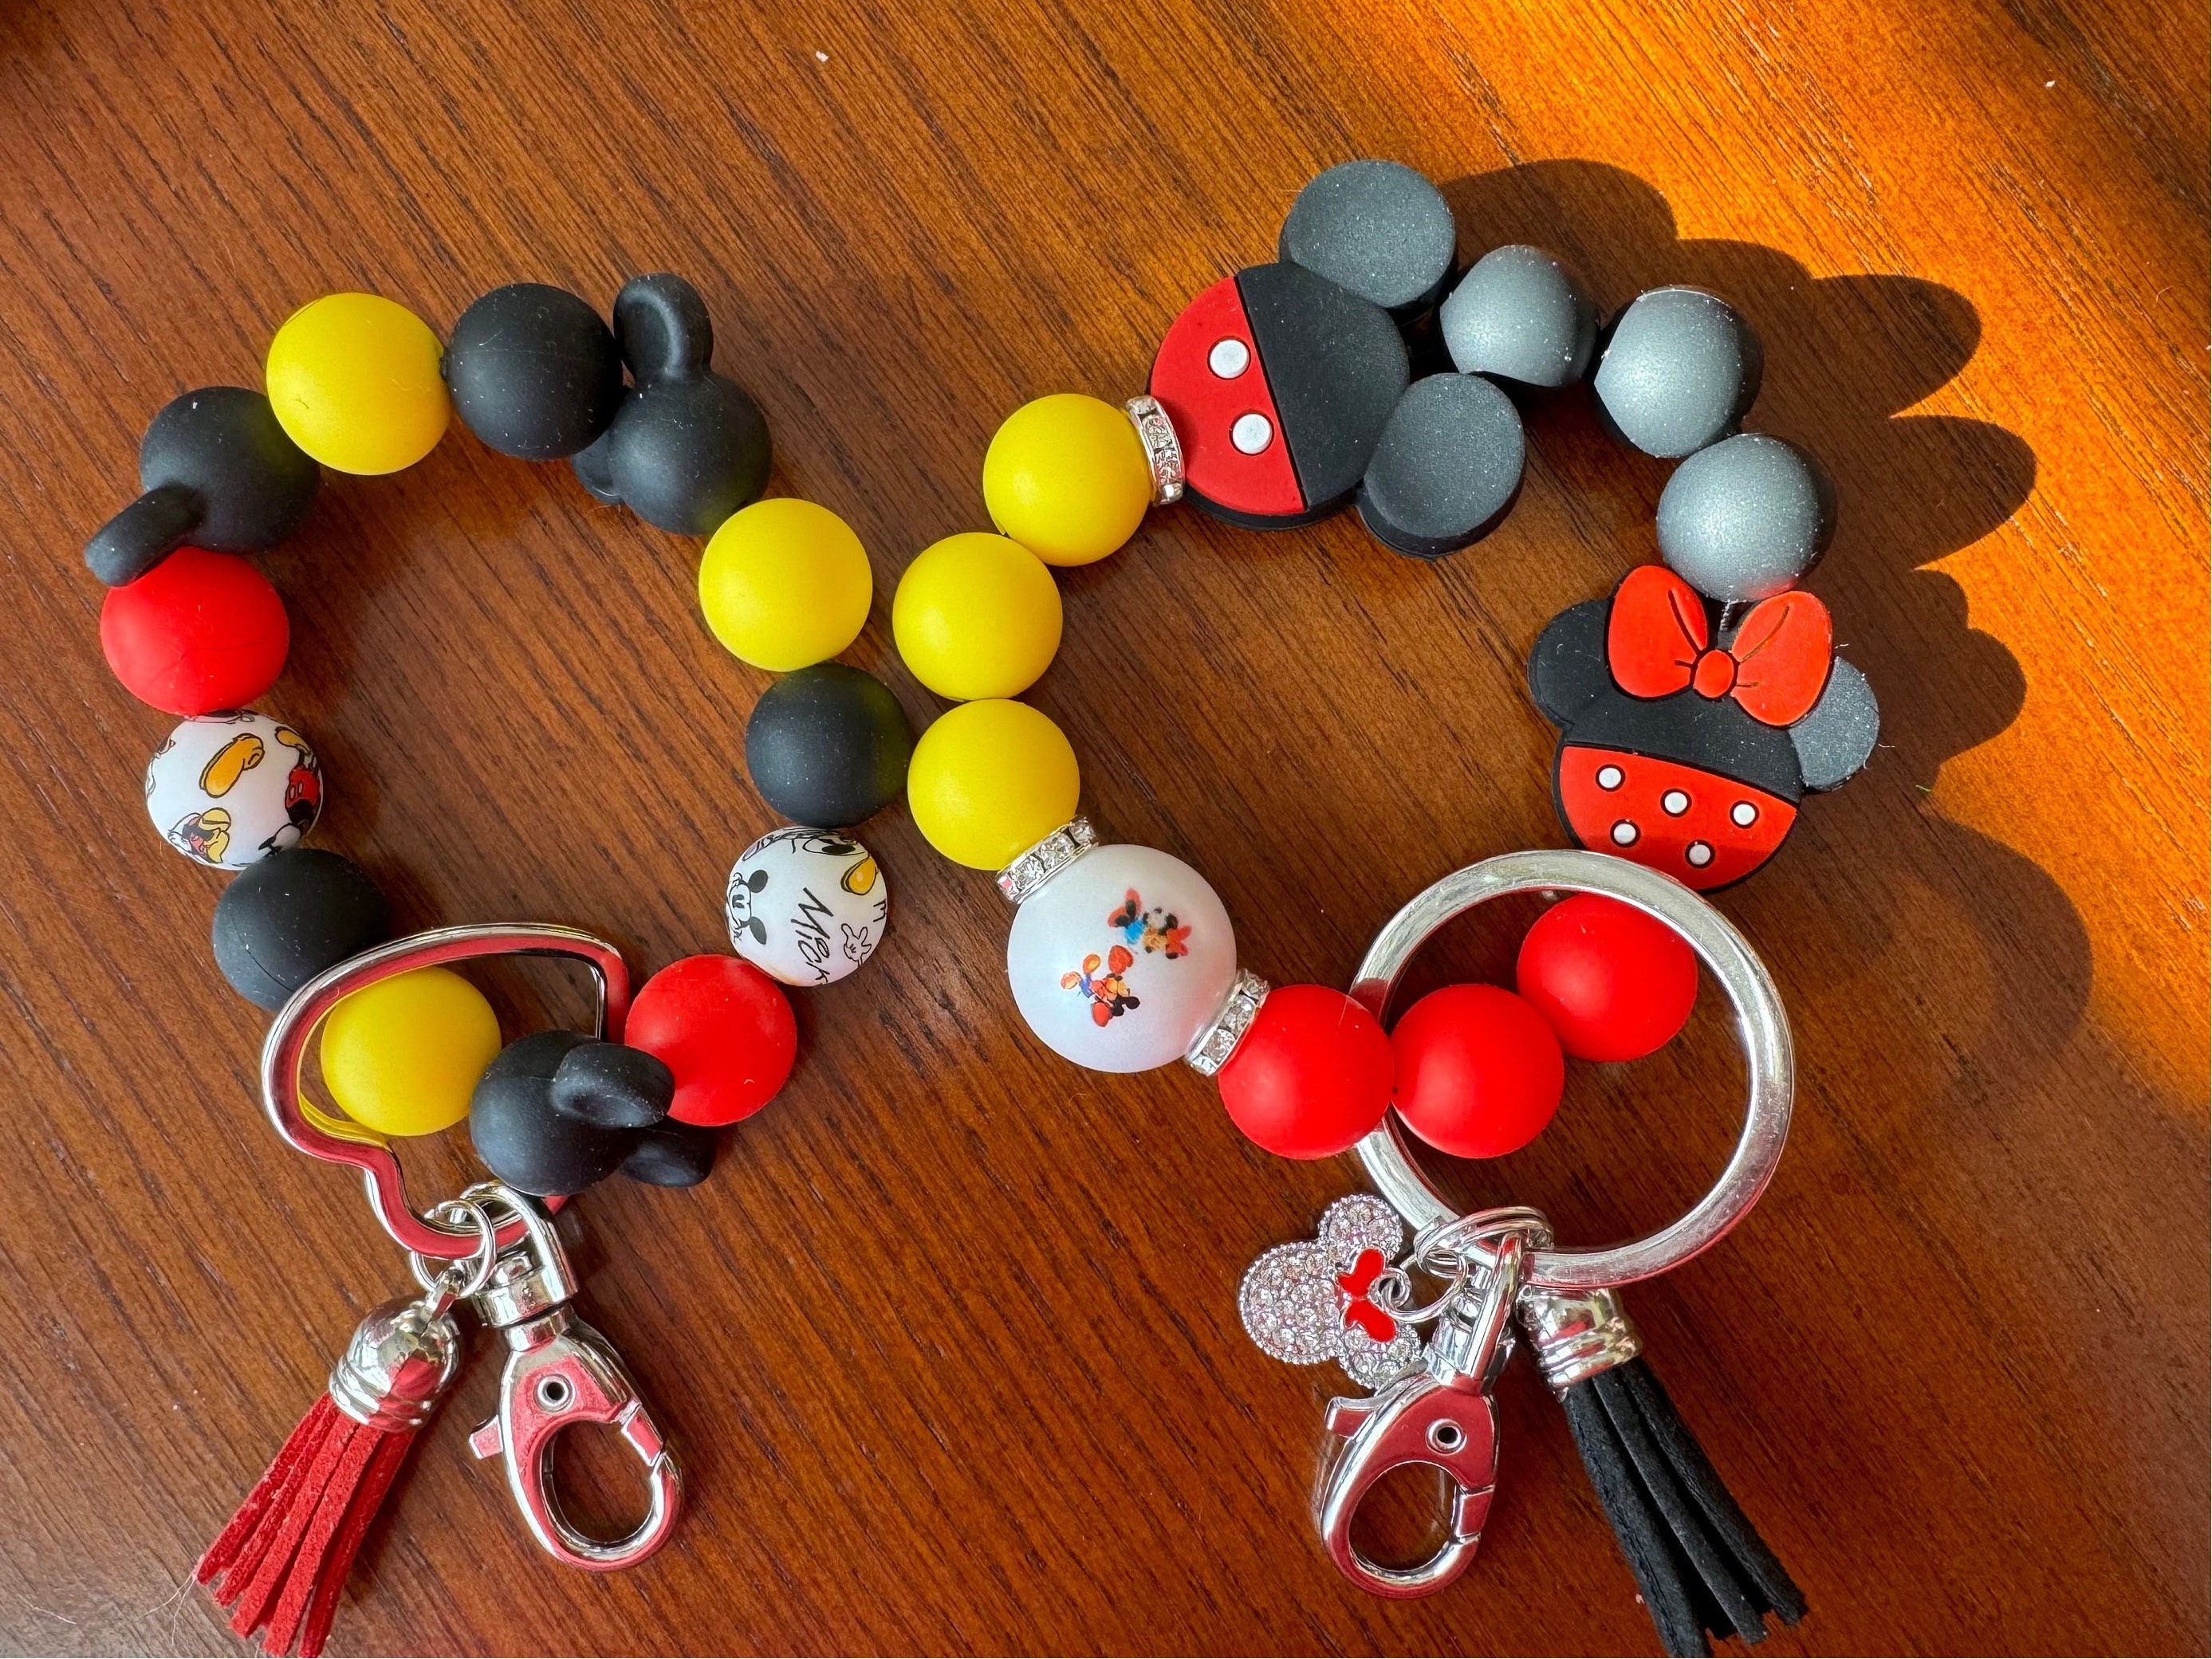 Wholesale Disney Silicone Focal Beads Products at Factory Prices from  Manufacturers in China, India, Korea, etc.